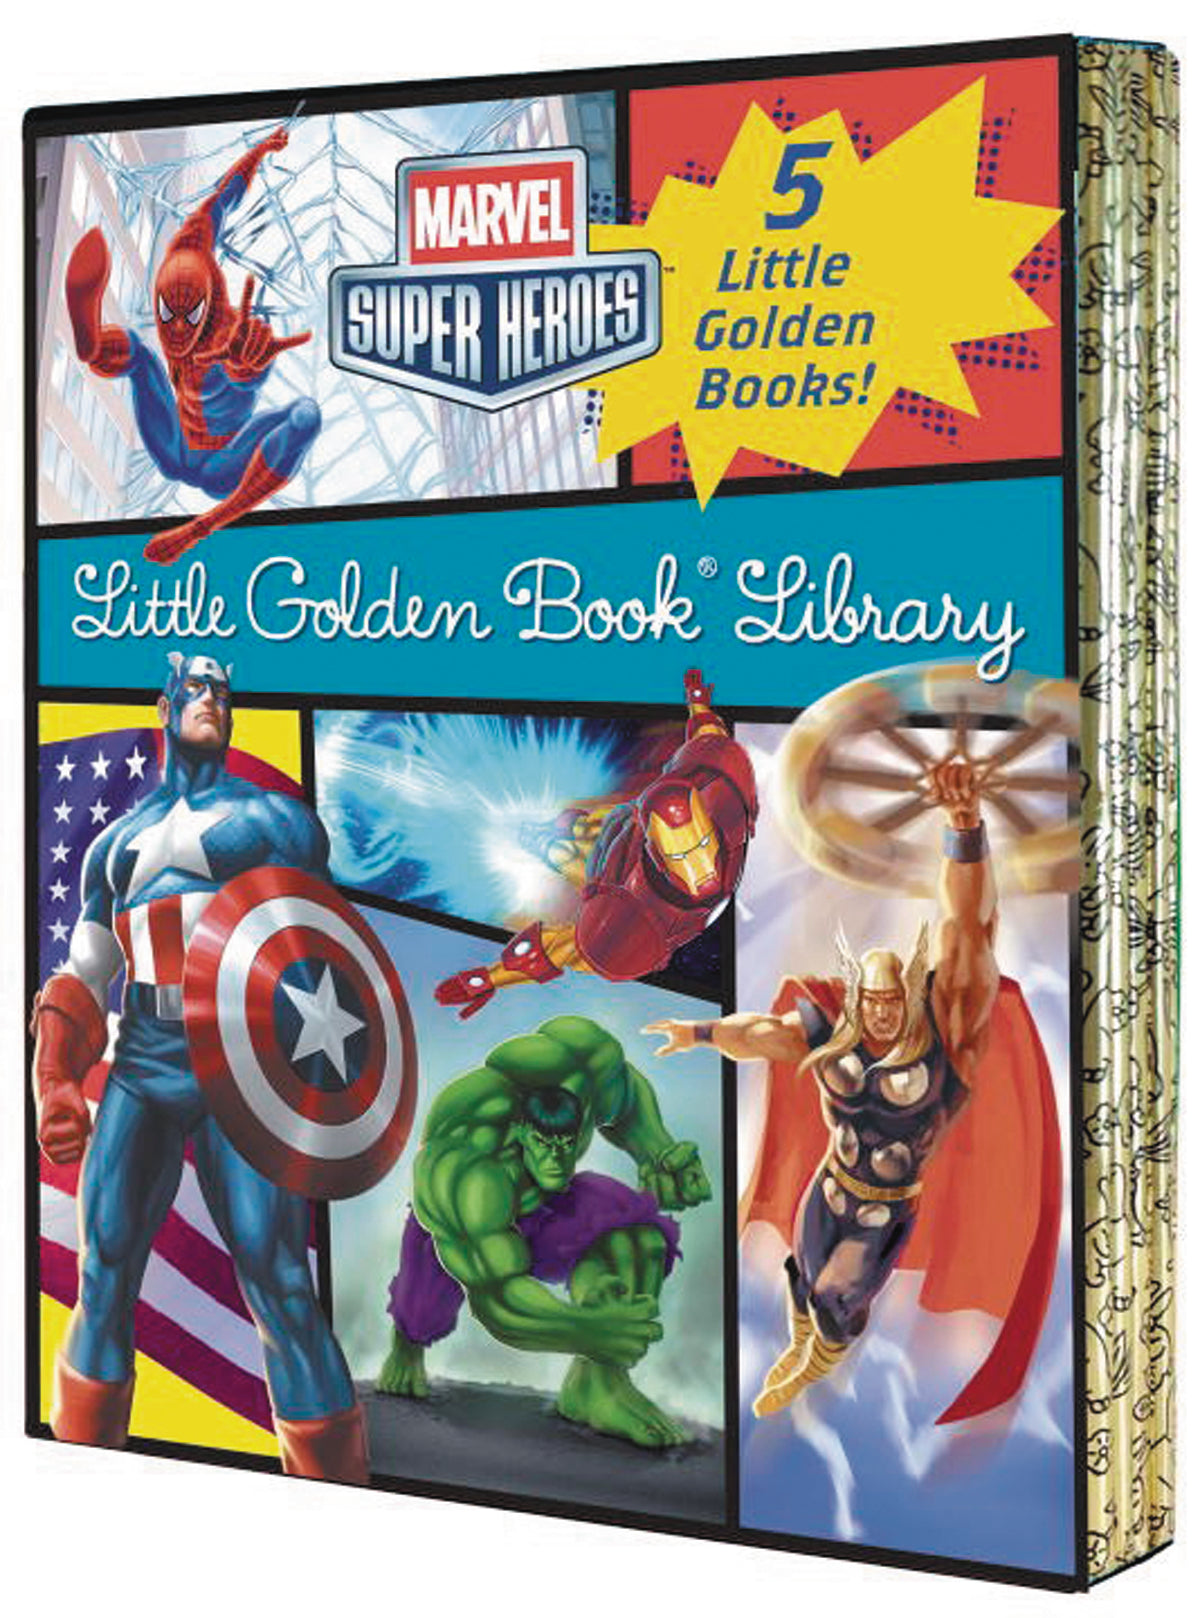 MARVEL HEROES LITTLE GOLDEN BOOK LIBRARY | Game Master's Emporium (The New GME)